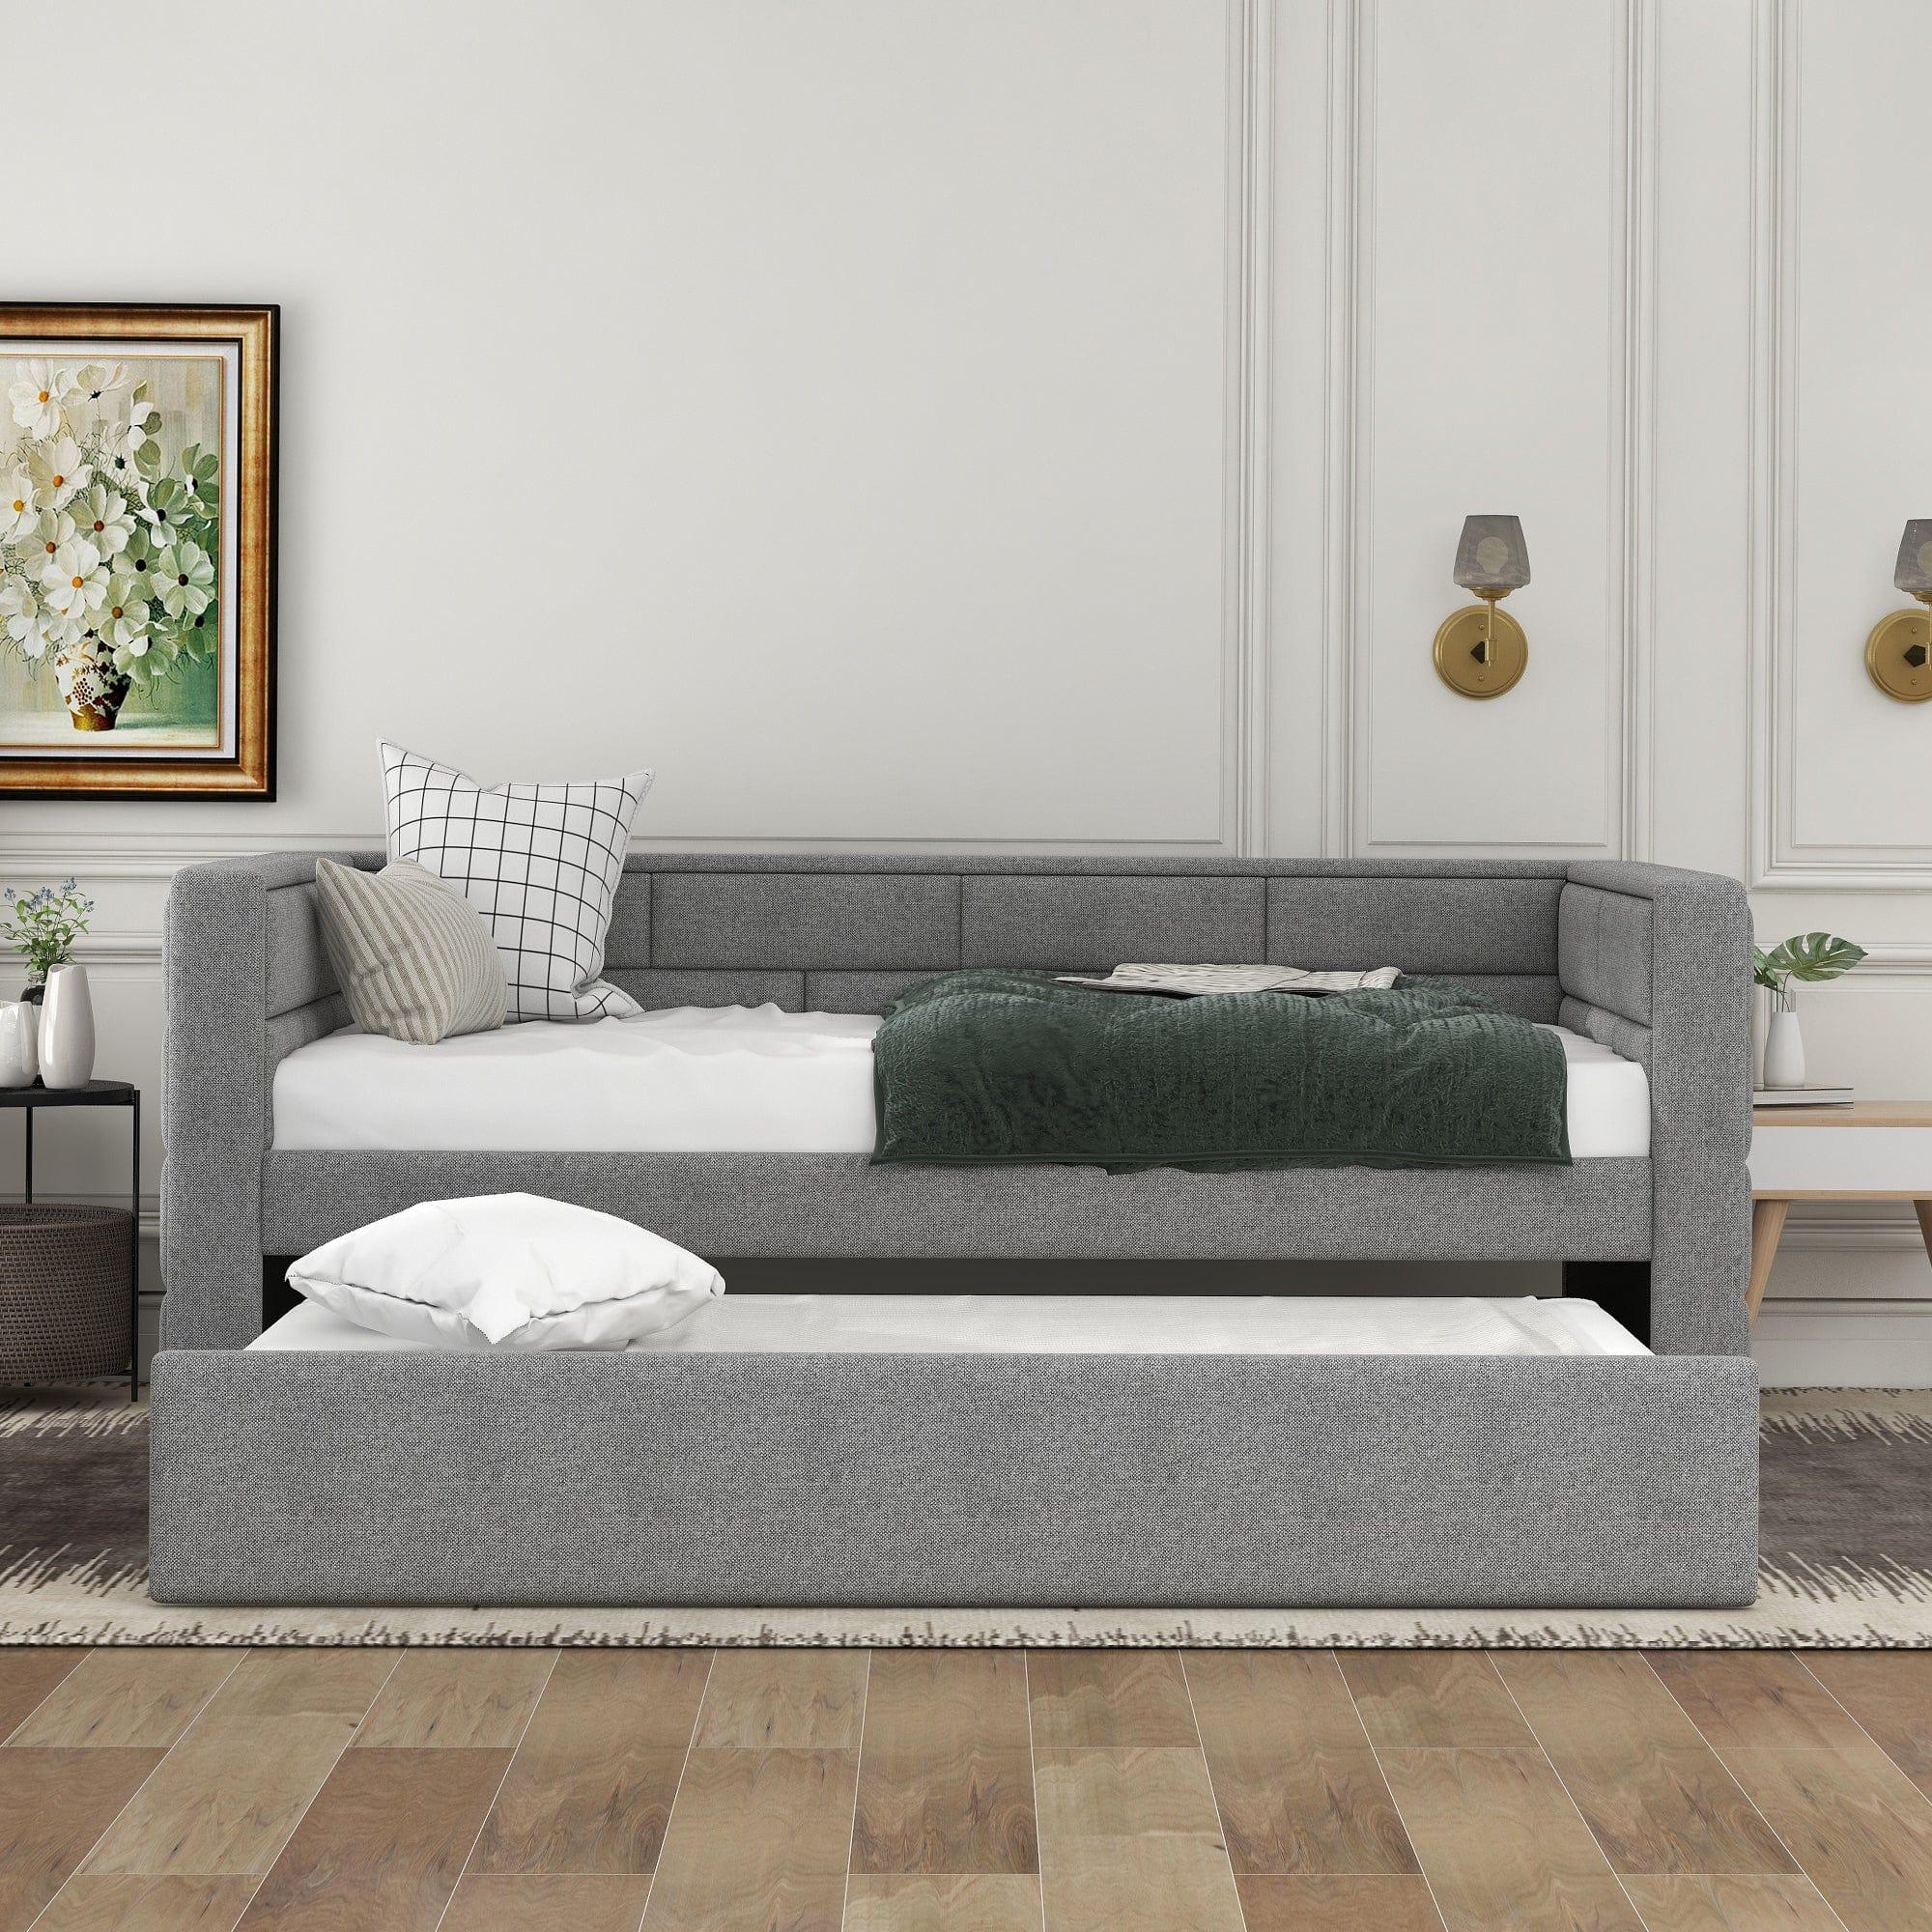 Shop Twin Size Daybed with Trundle, Upholstered Daybed with Padded Back, Gray Mademoiselle Home Decor